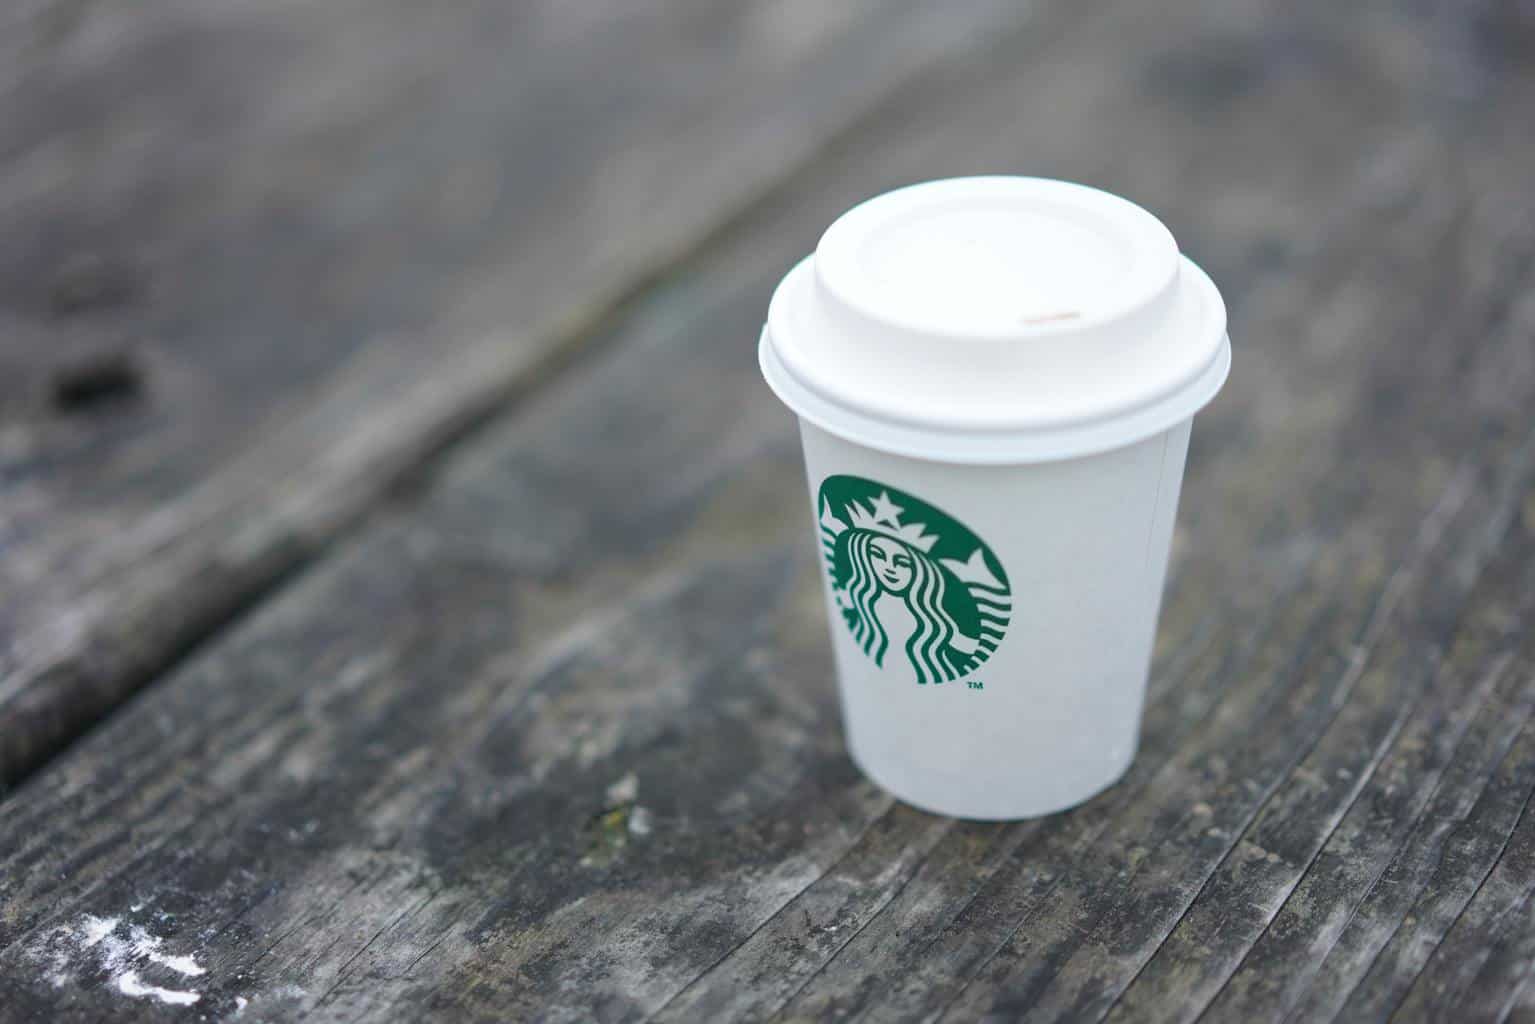 Short Starbucks cup on a wooden plank surface